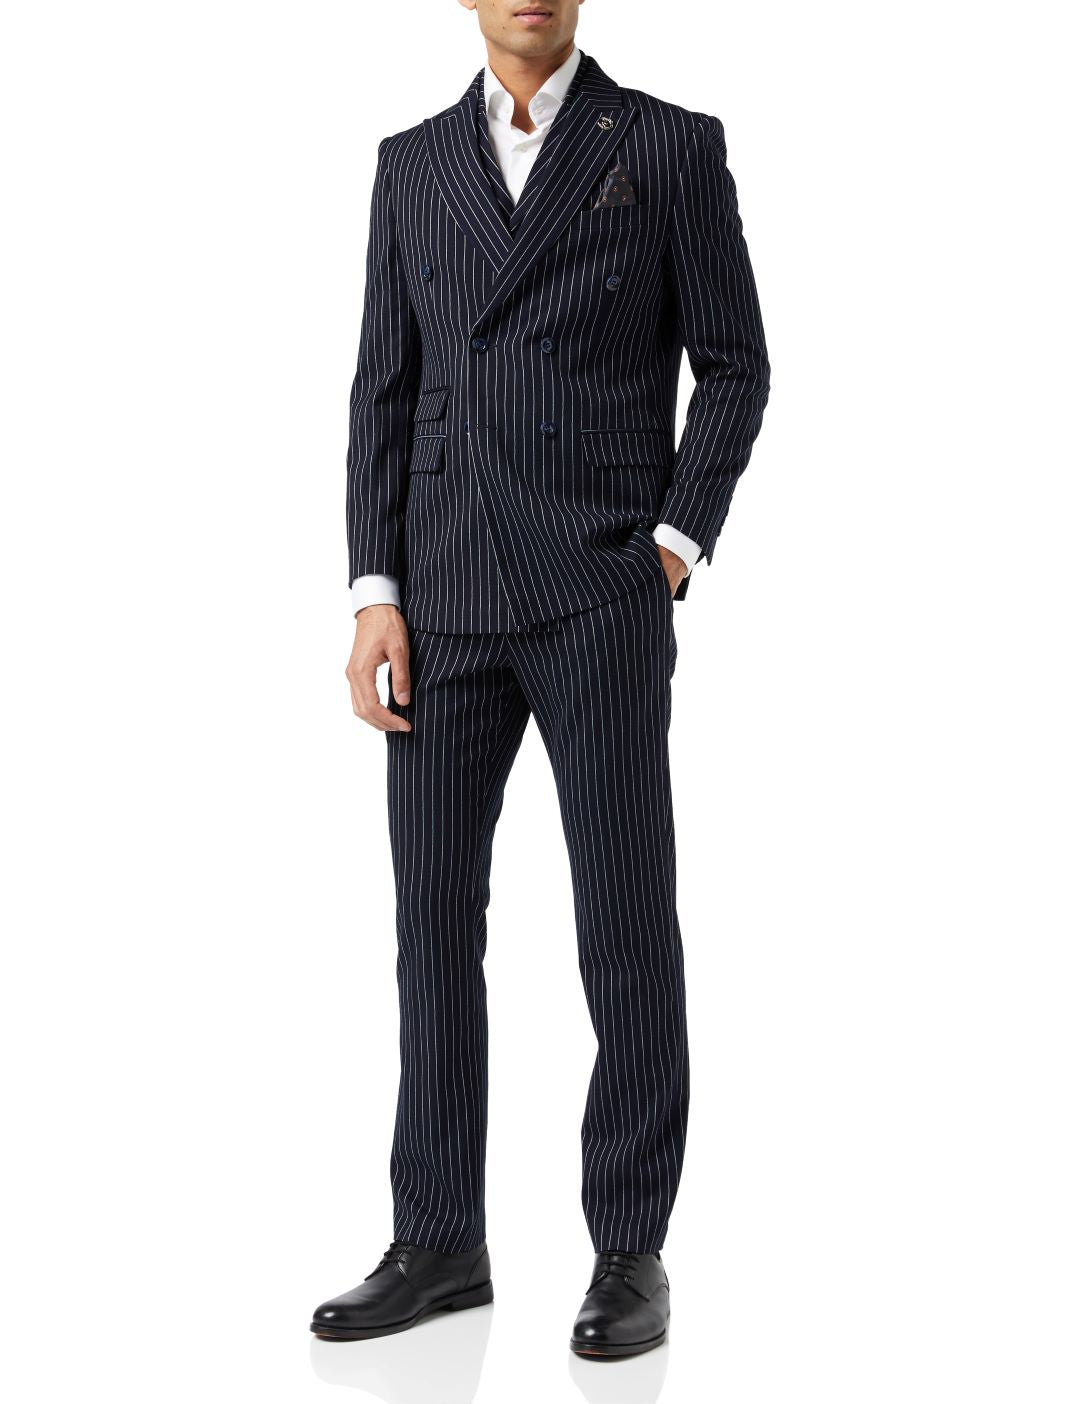 ALFRED – NAVY DOUBLE BREASTED PINSTRIPE BLAZER